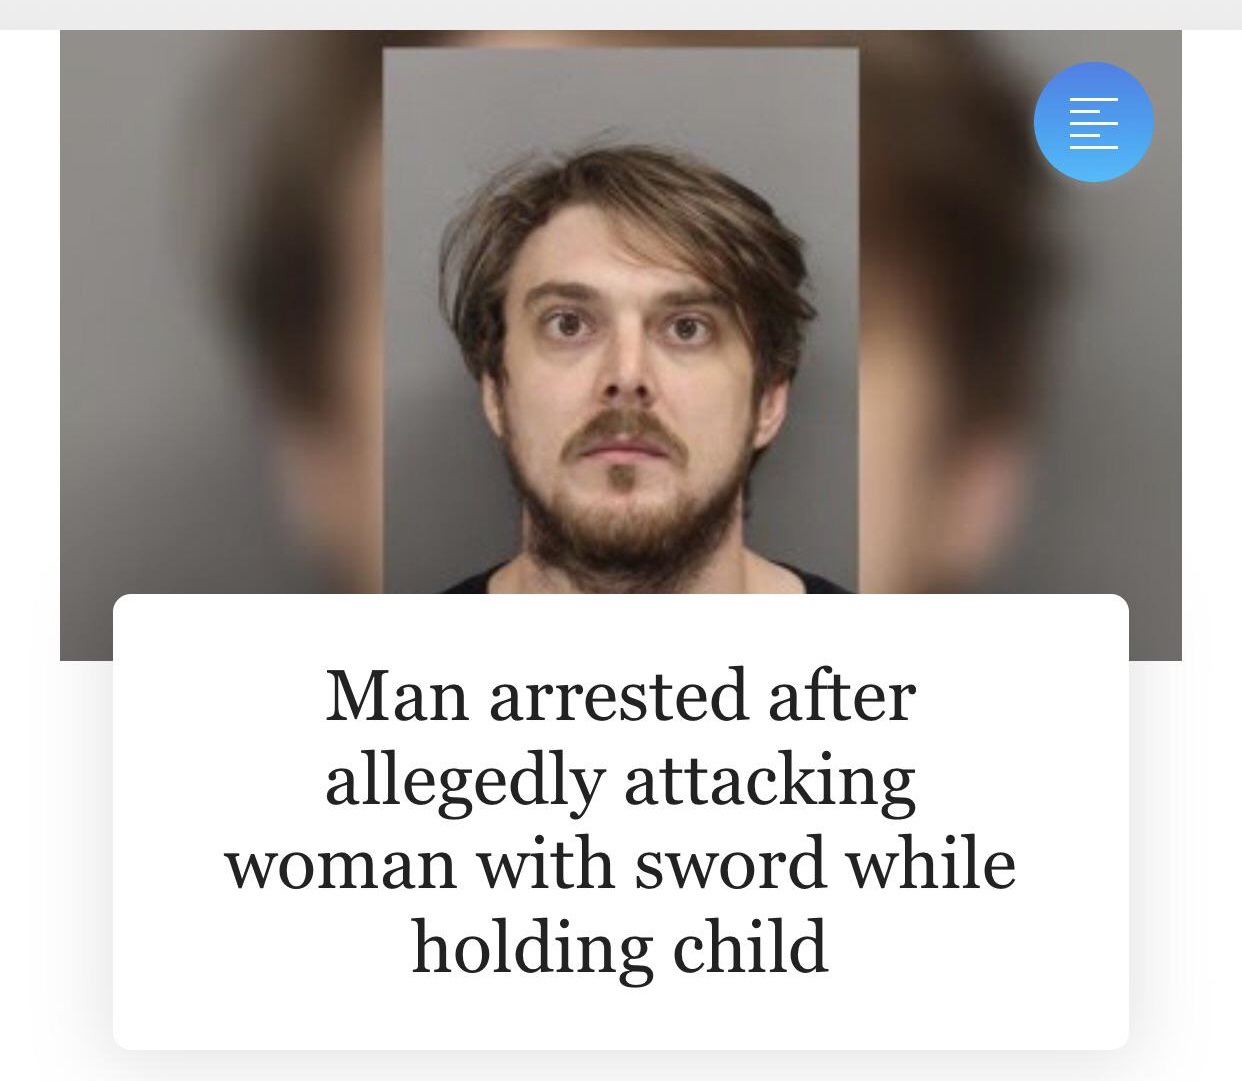 photo caption - Man arrested after allegedly attacking woman with sword while holding child